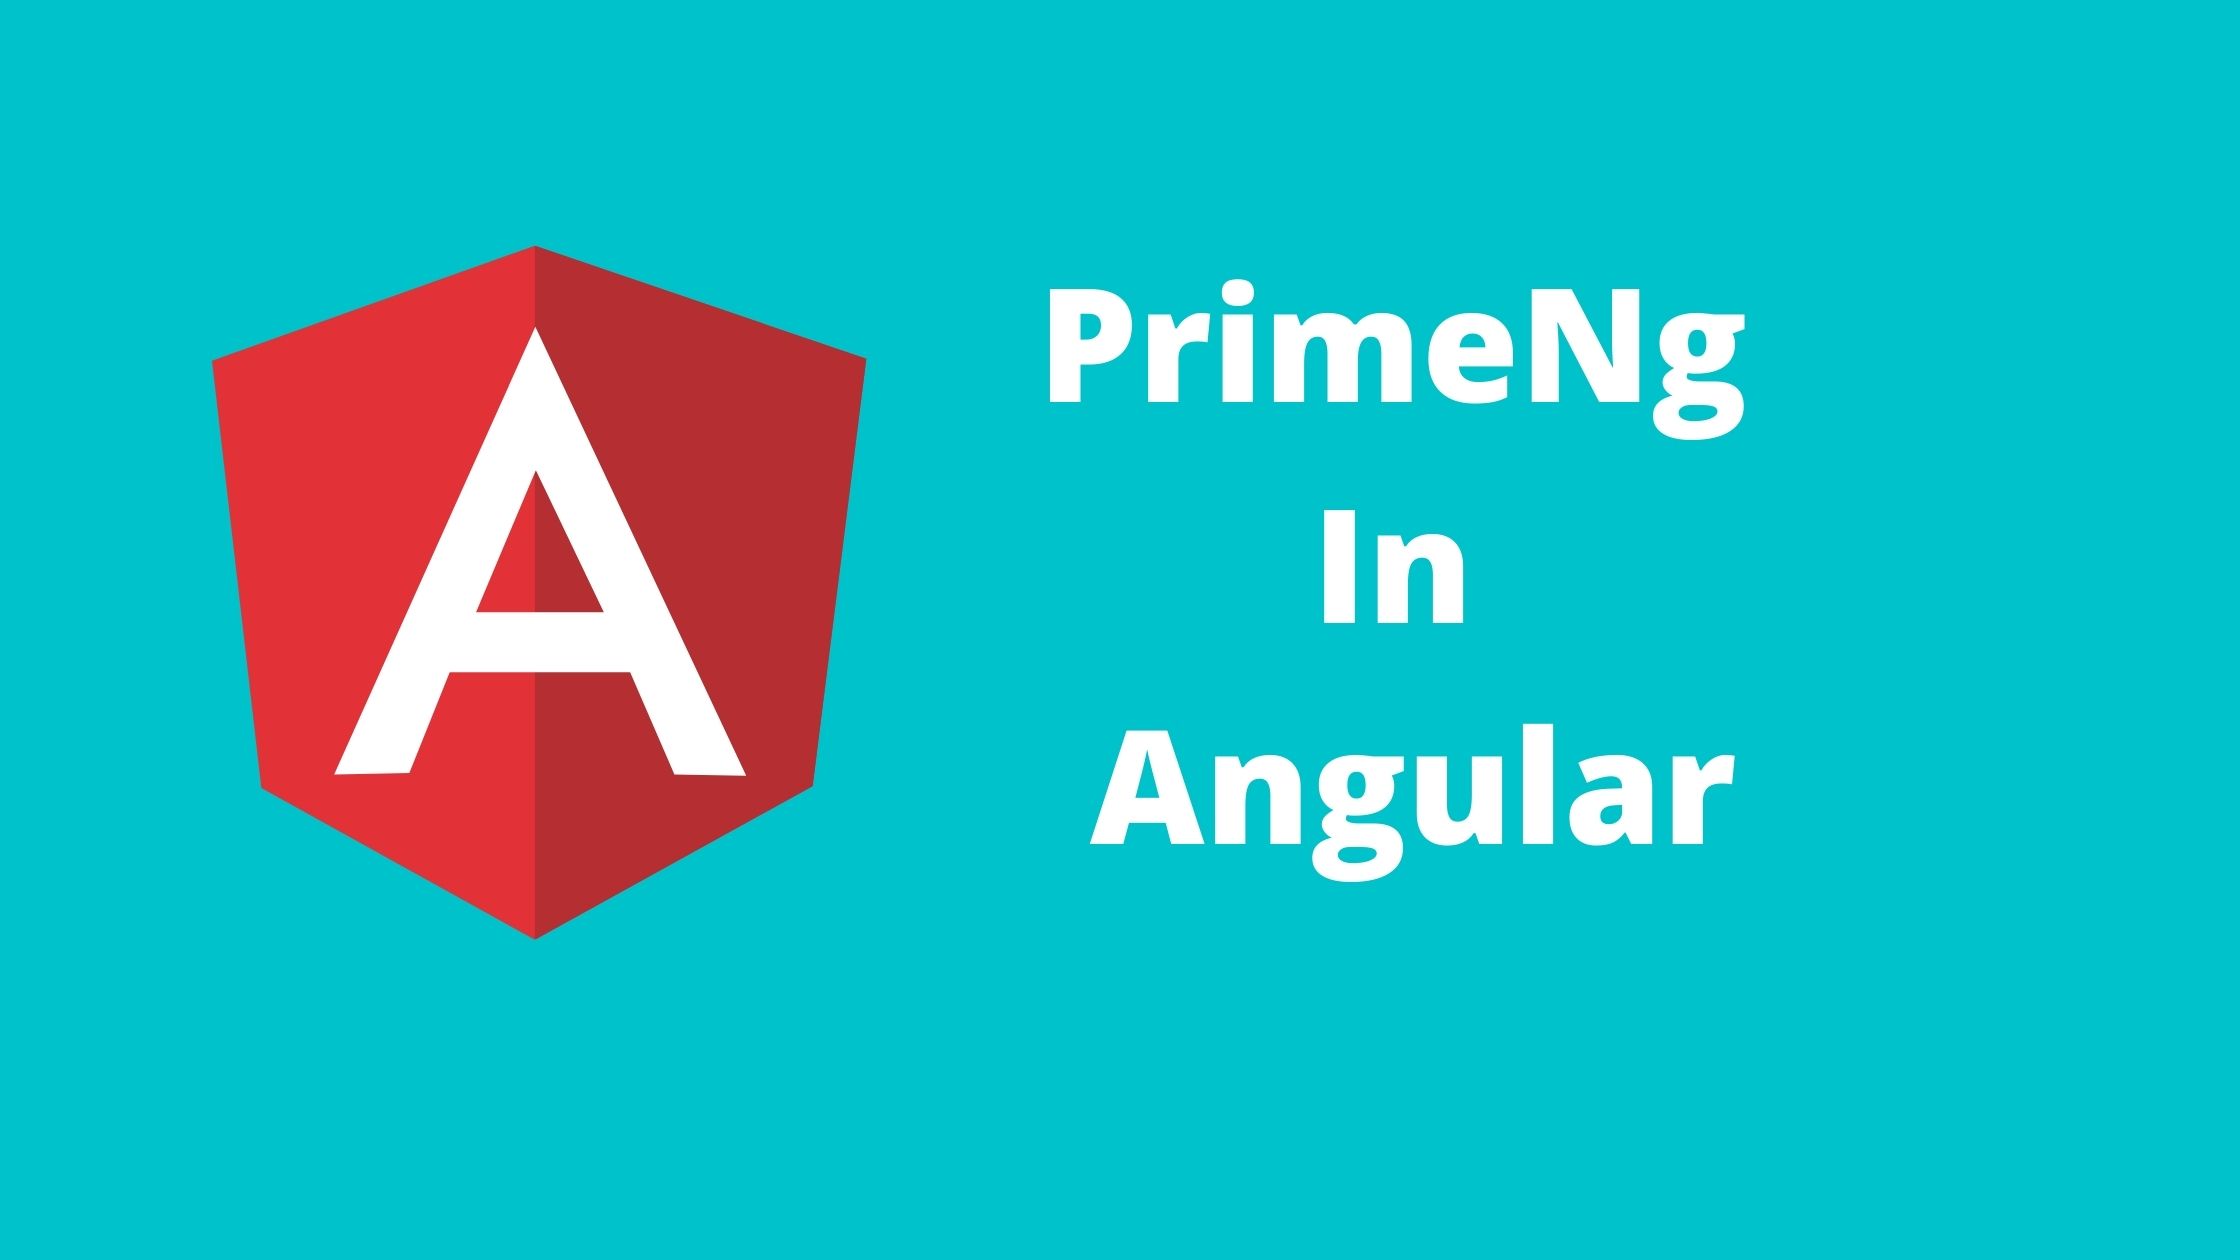 PrimeNg Angular - How to add/Install PrimeNg UI Library in Angular